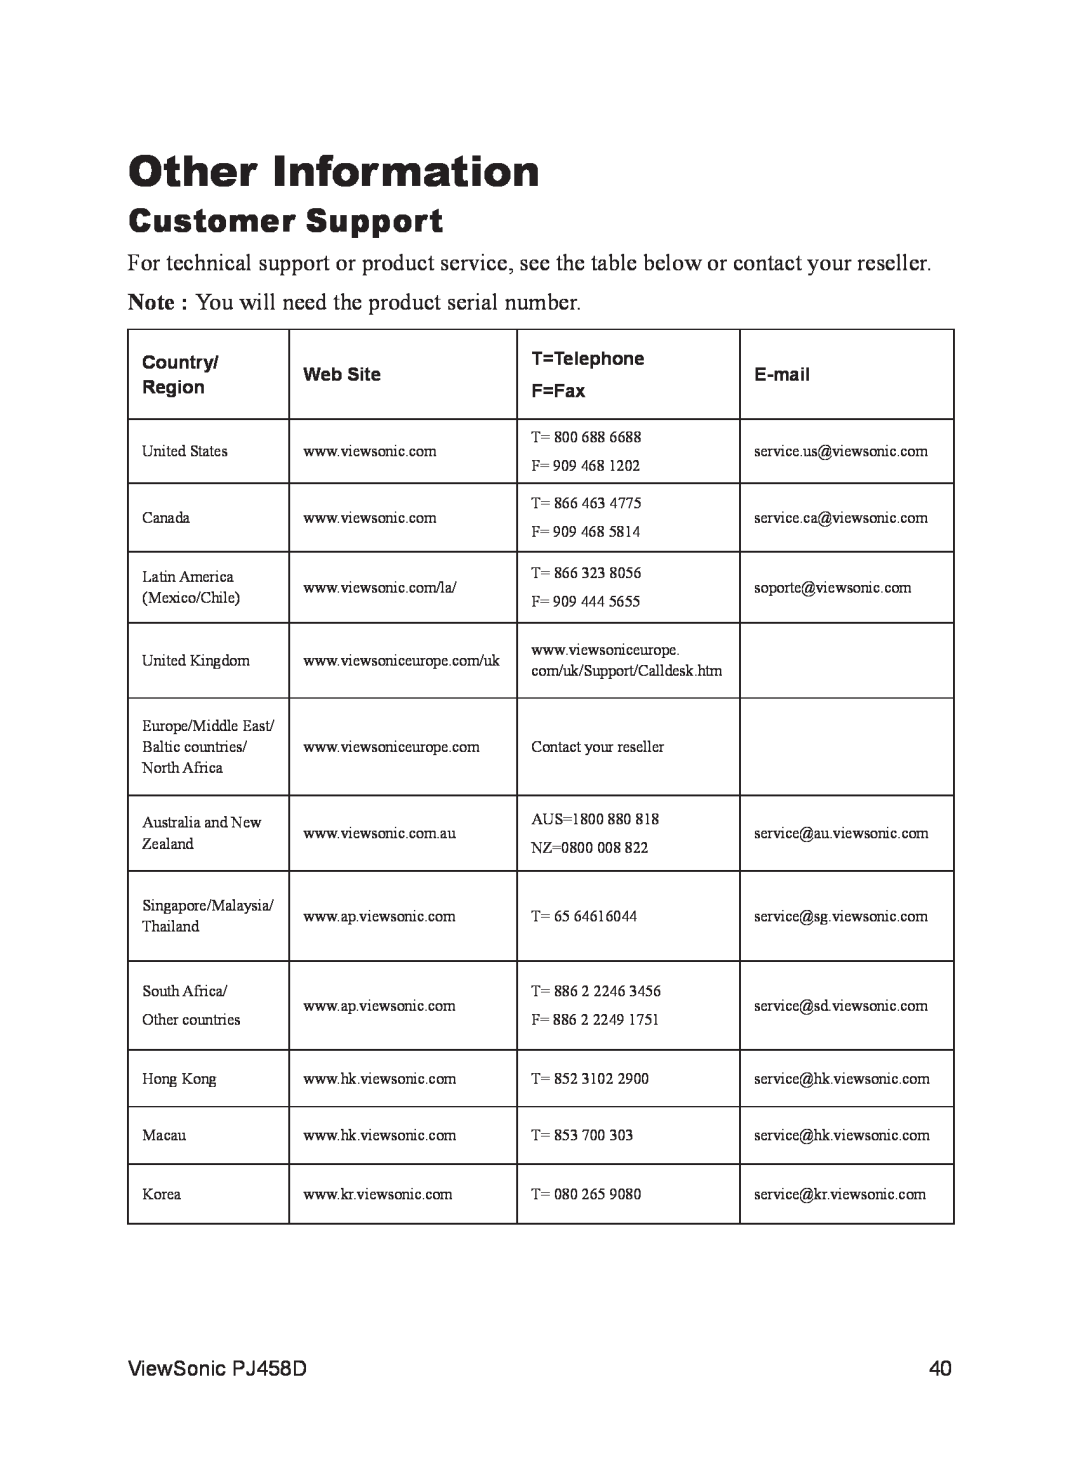 ViewSonic VS10872 manual Other Information, Customer Support, Country, Web Site, T=Telephone, E-mail, Region, F=Fax 